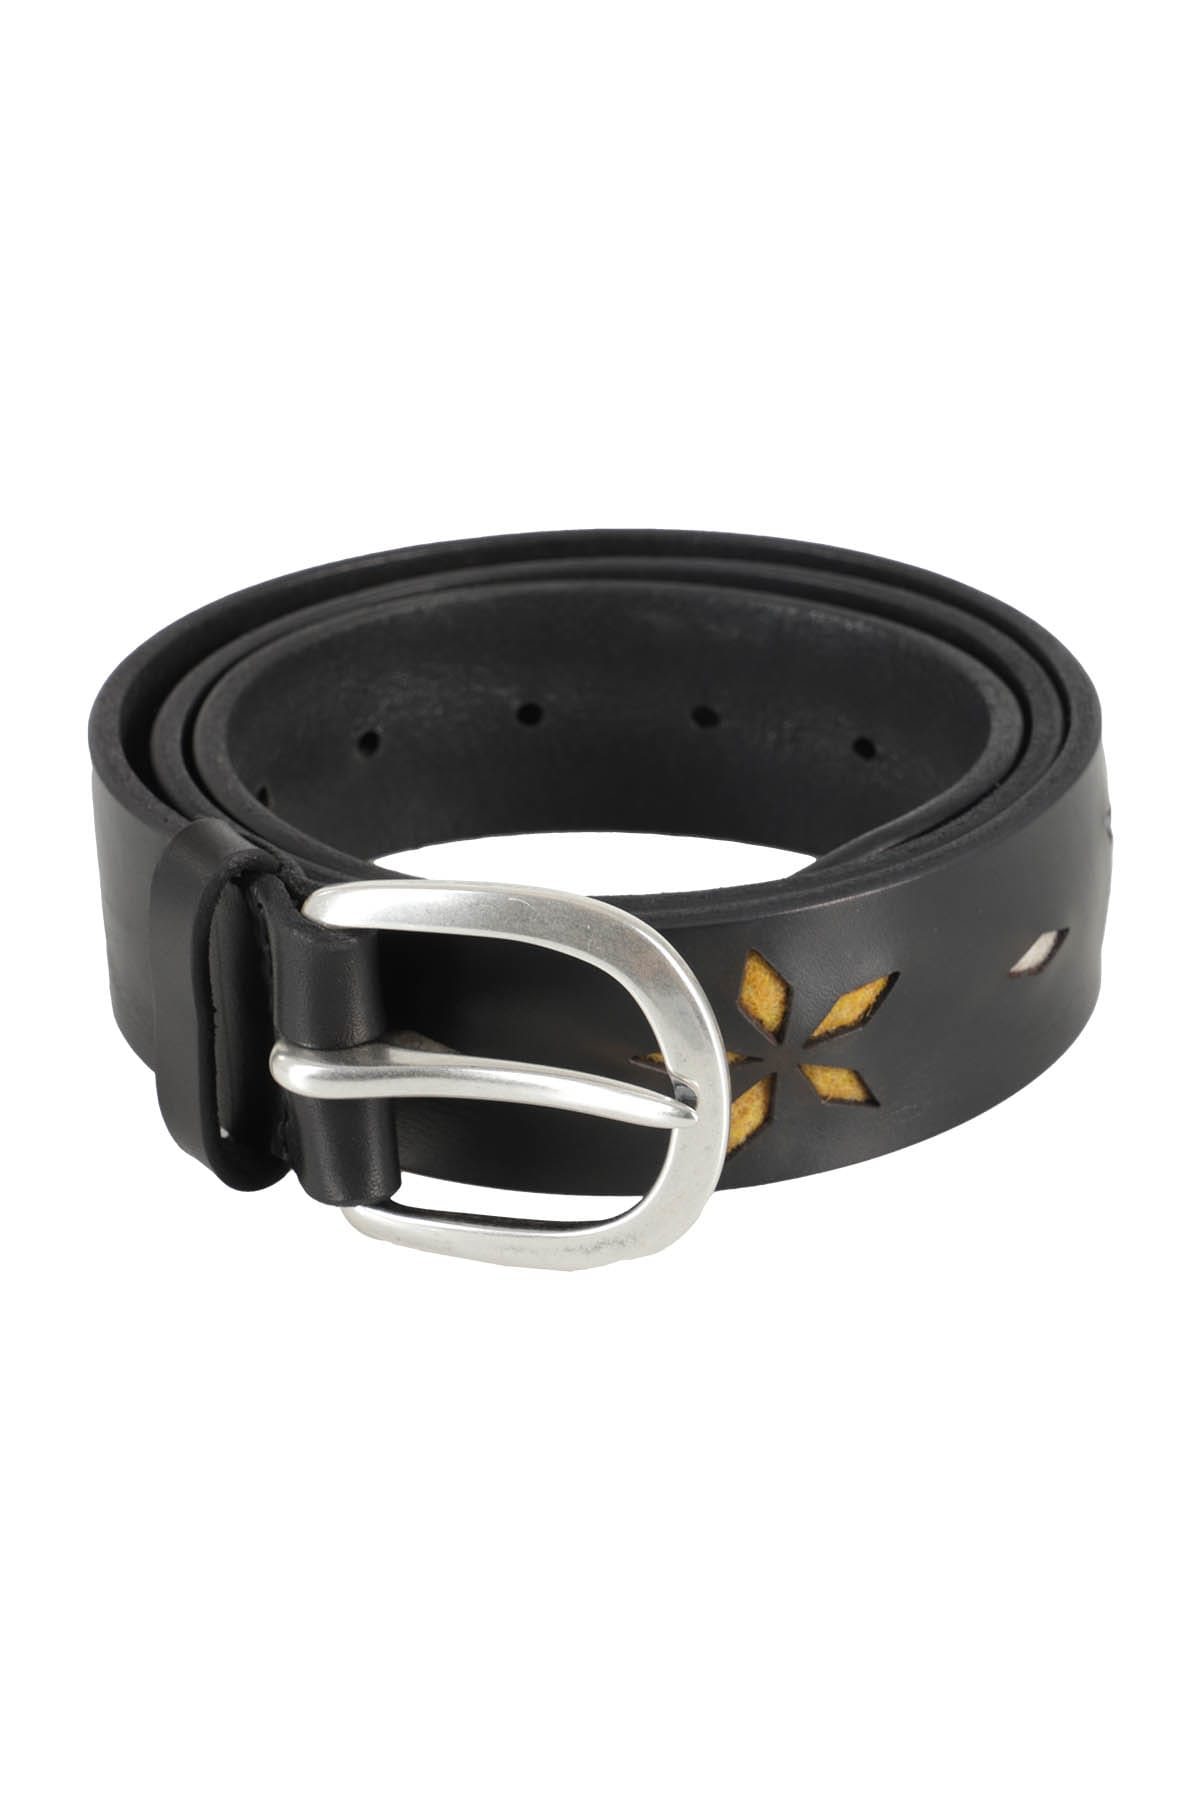 Orciani Leather Belt In Ner Nero